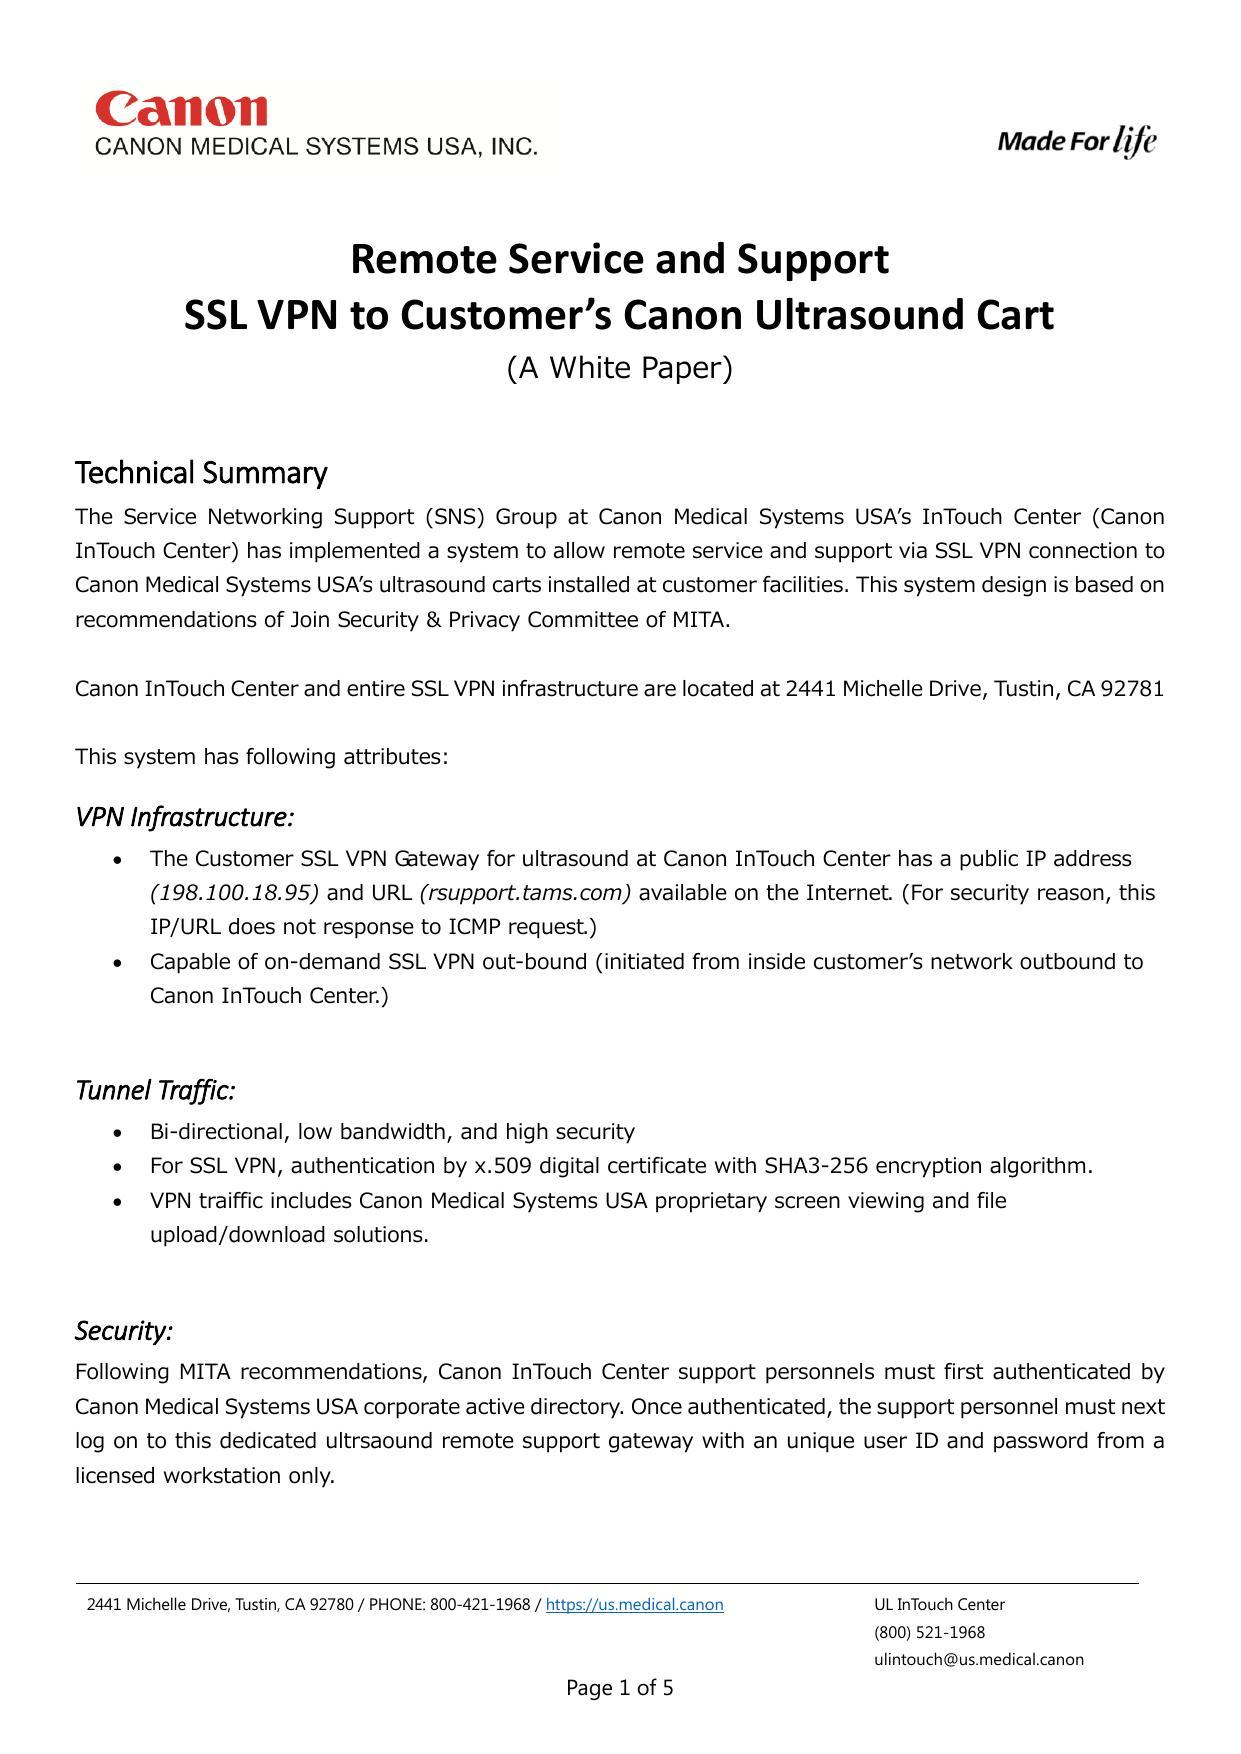 canon-ultrasound-cart-remote-service-and-support-user-manual.pdf